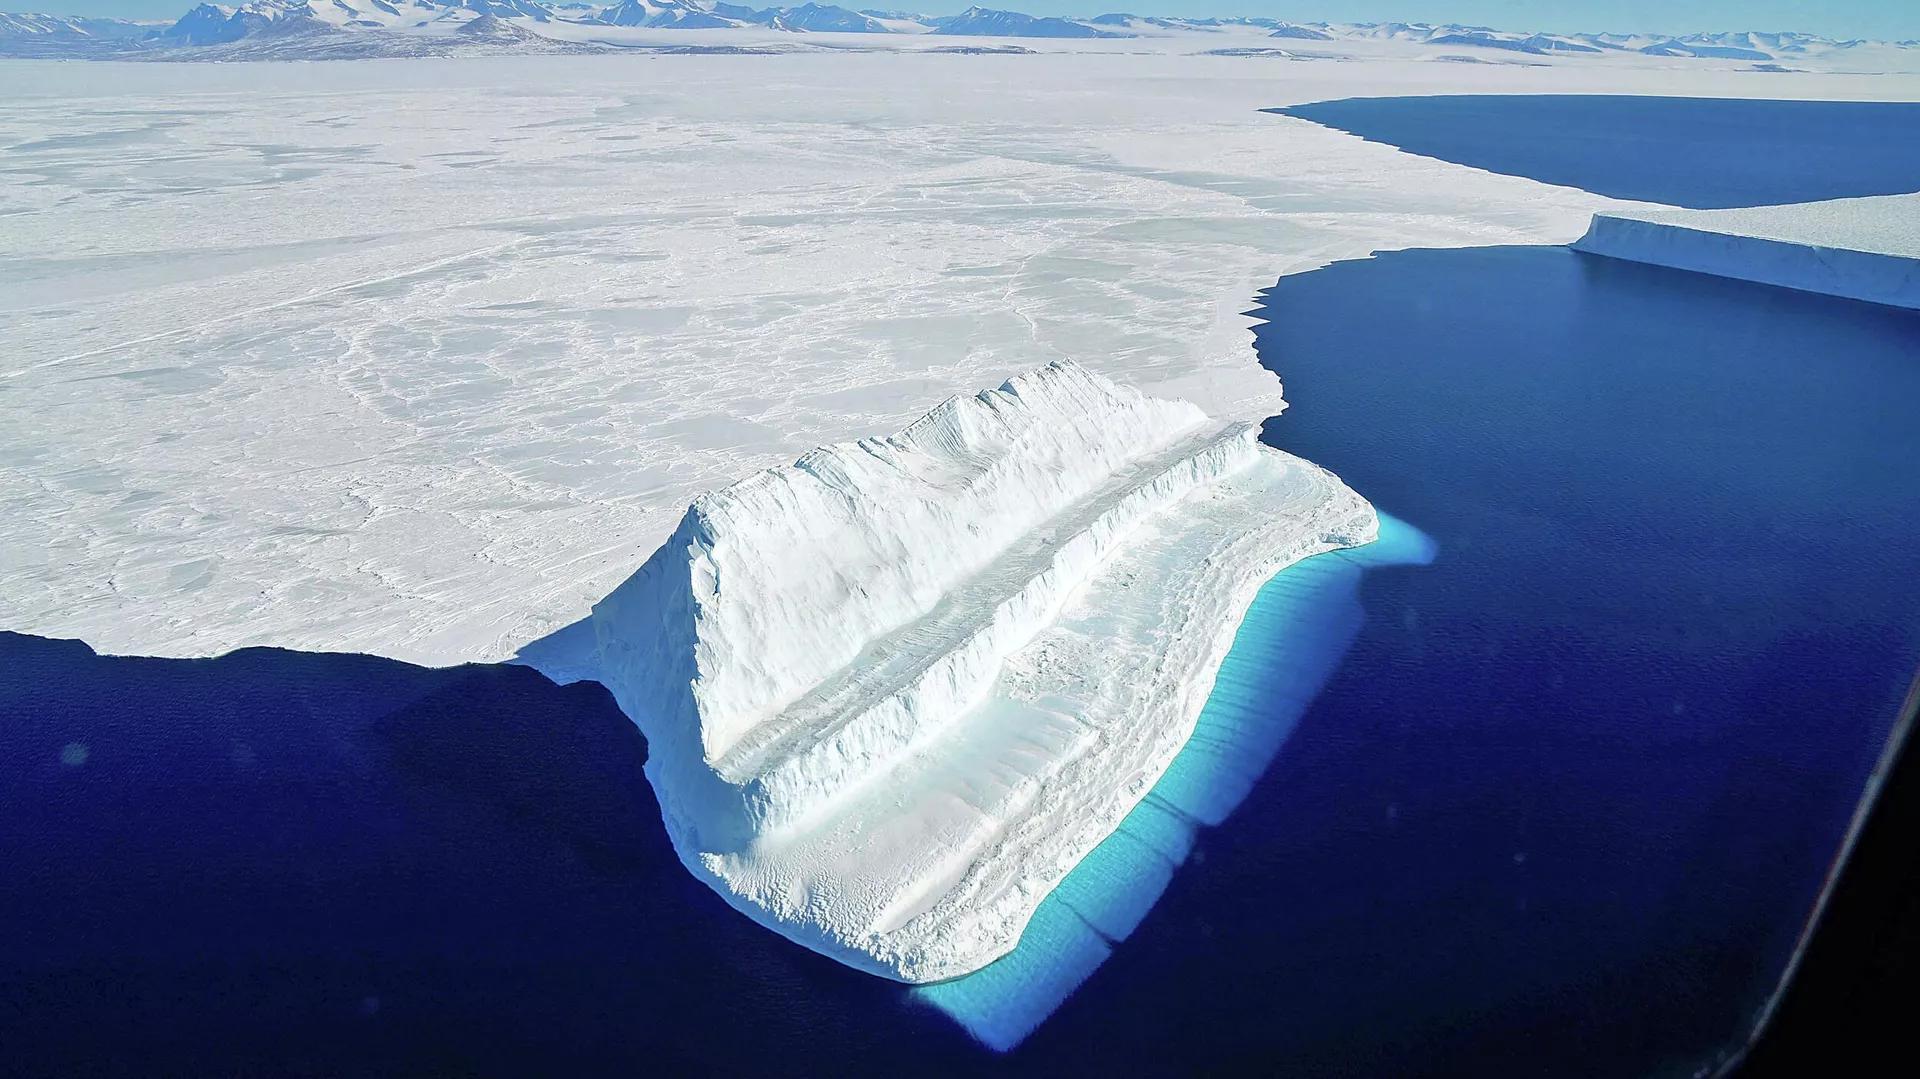 Antarctic Ice Sheet May Be Hiding Earth’s Largest Groundwater Reservoir, Scientists Say